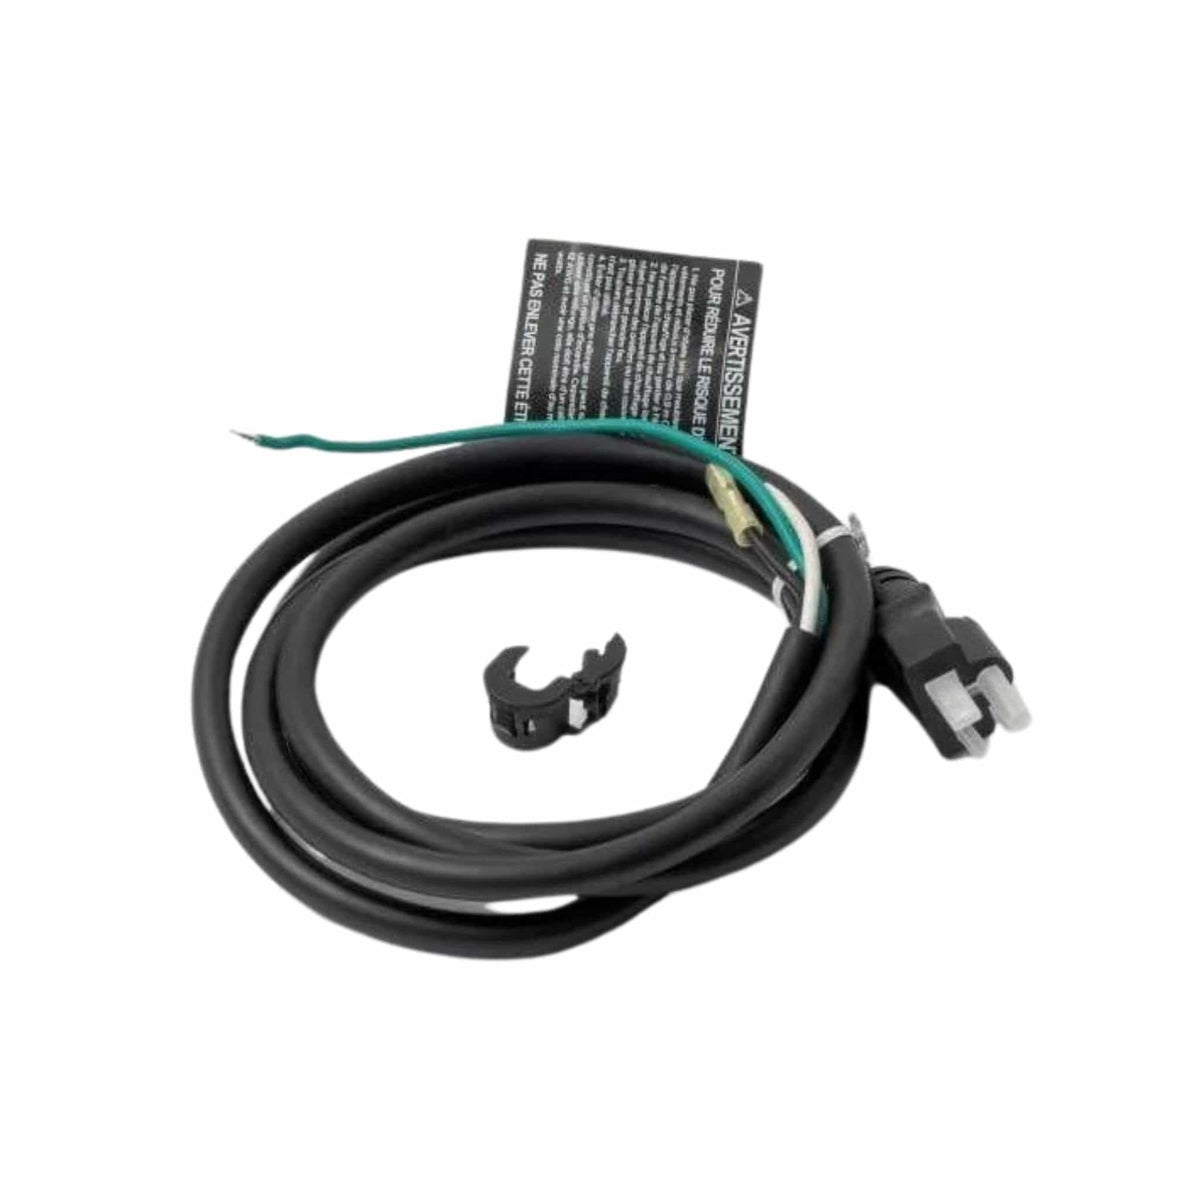 Bromic Mains Cable for Eclipse Portable